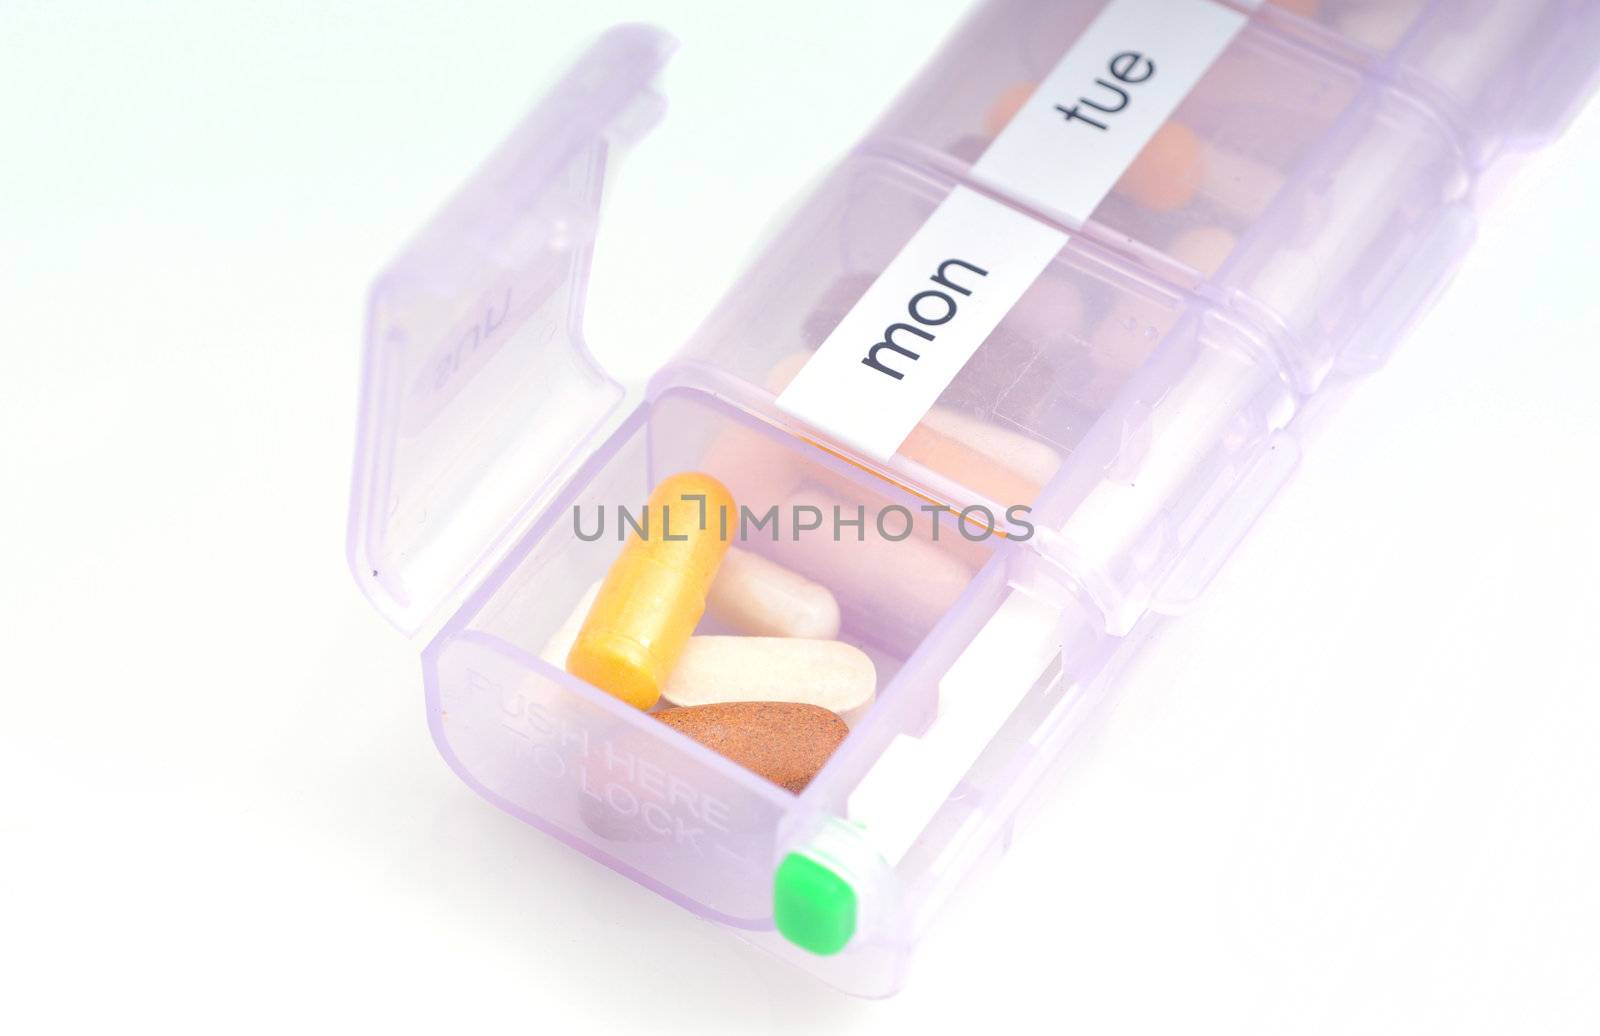 daily Vitamins in pill box by ftlaudgirl